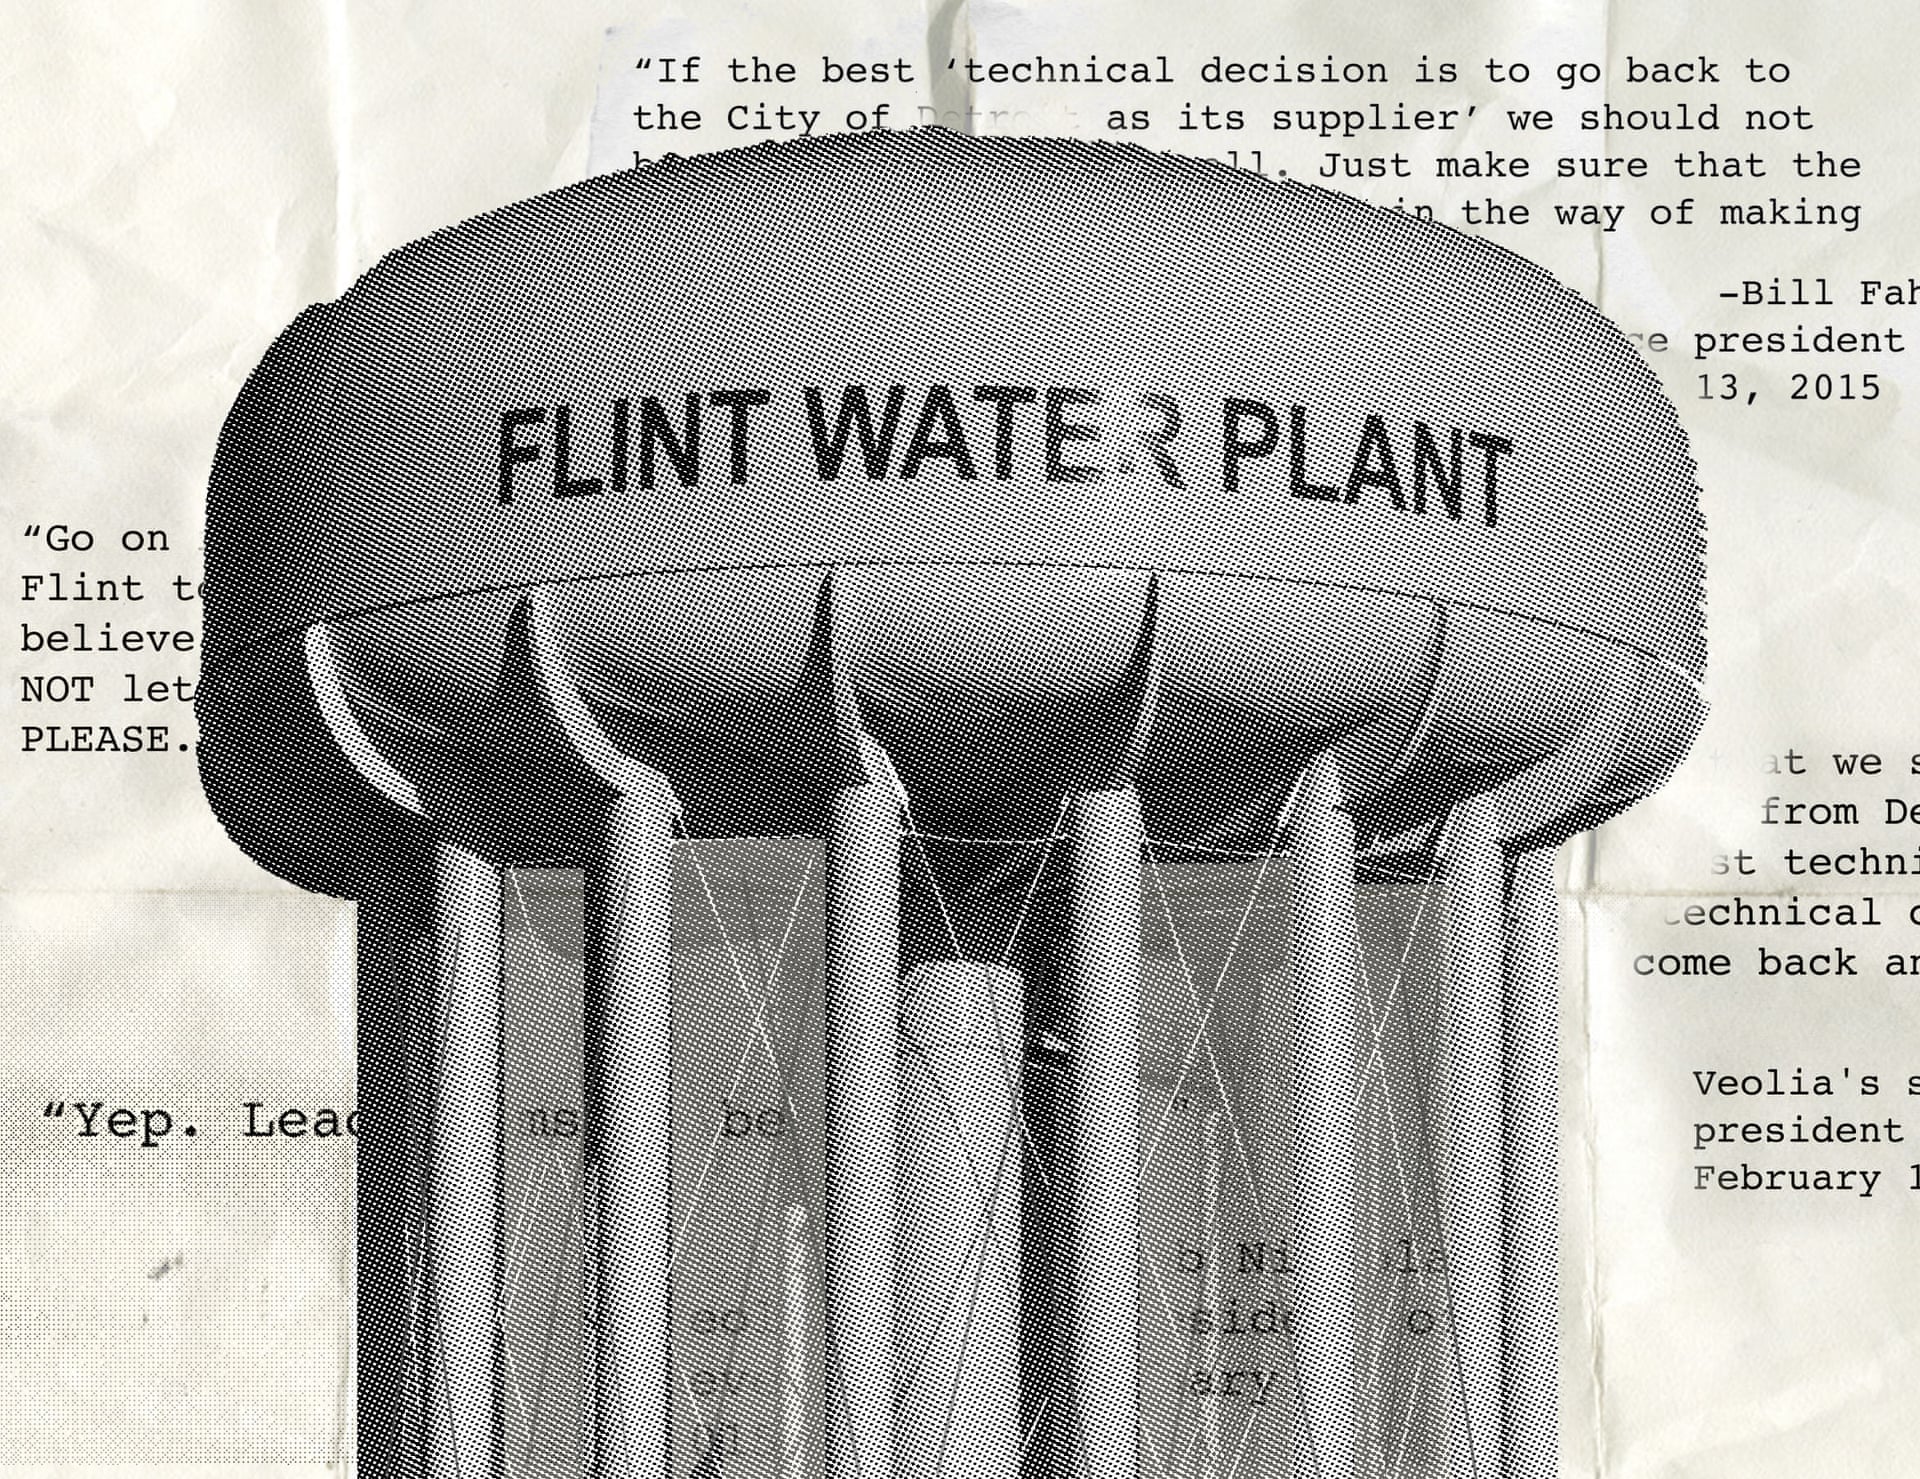 Revealed: water company and city officials knew about Flint poison risk